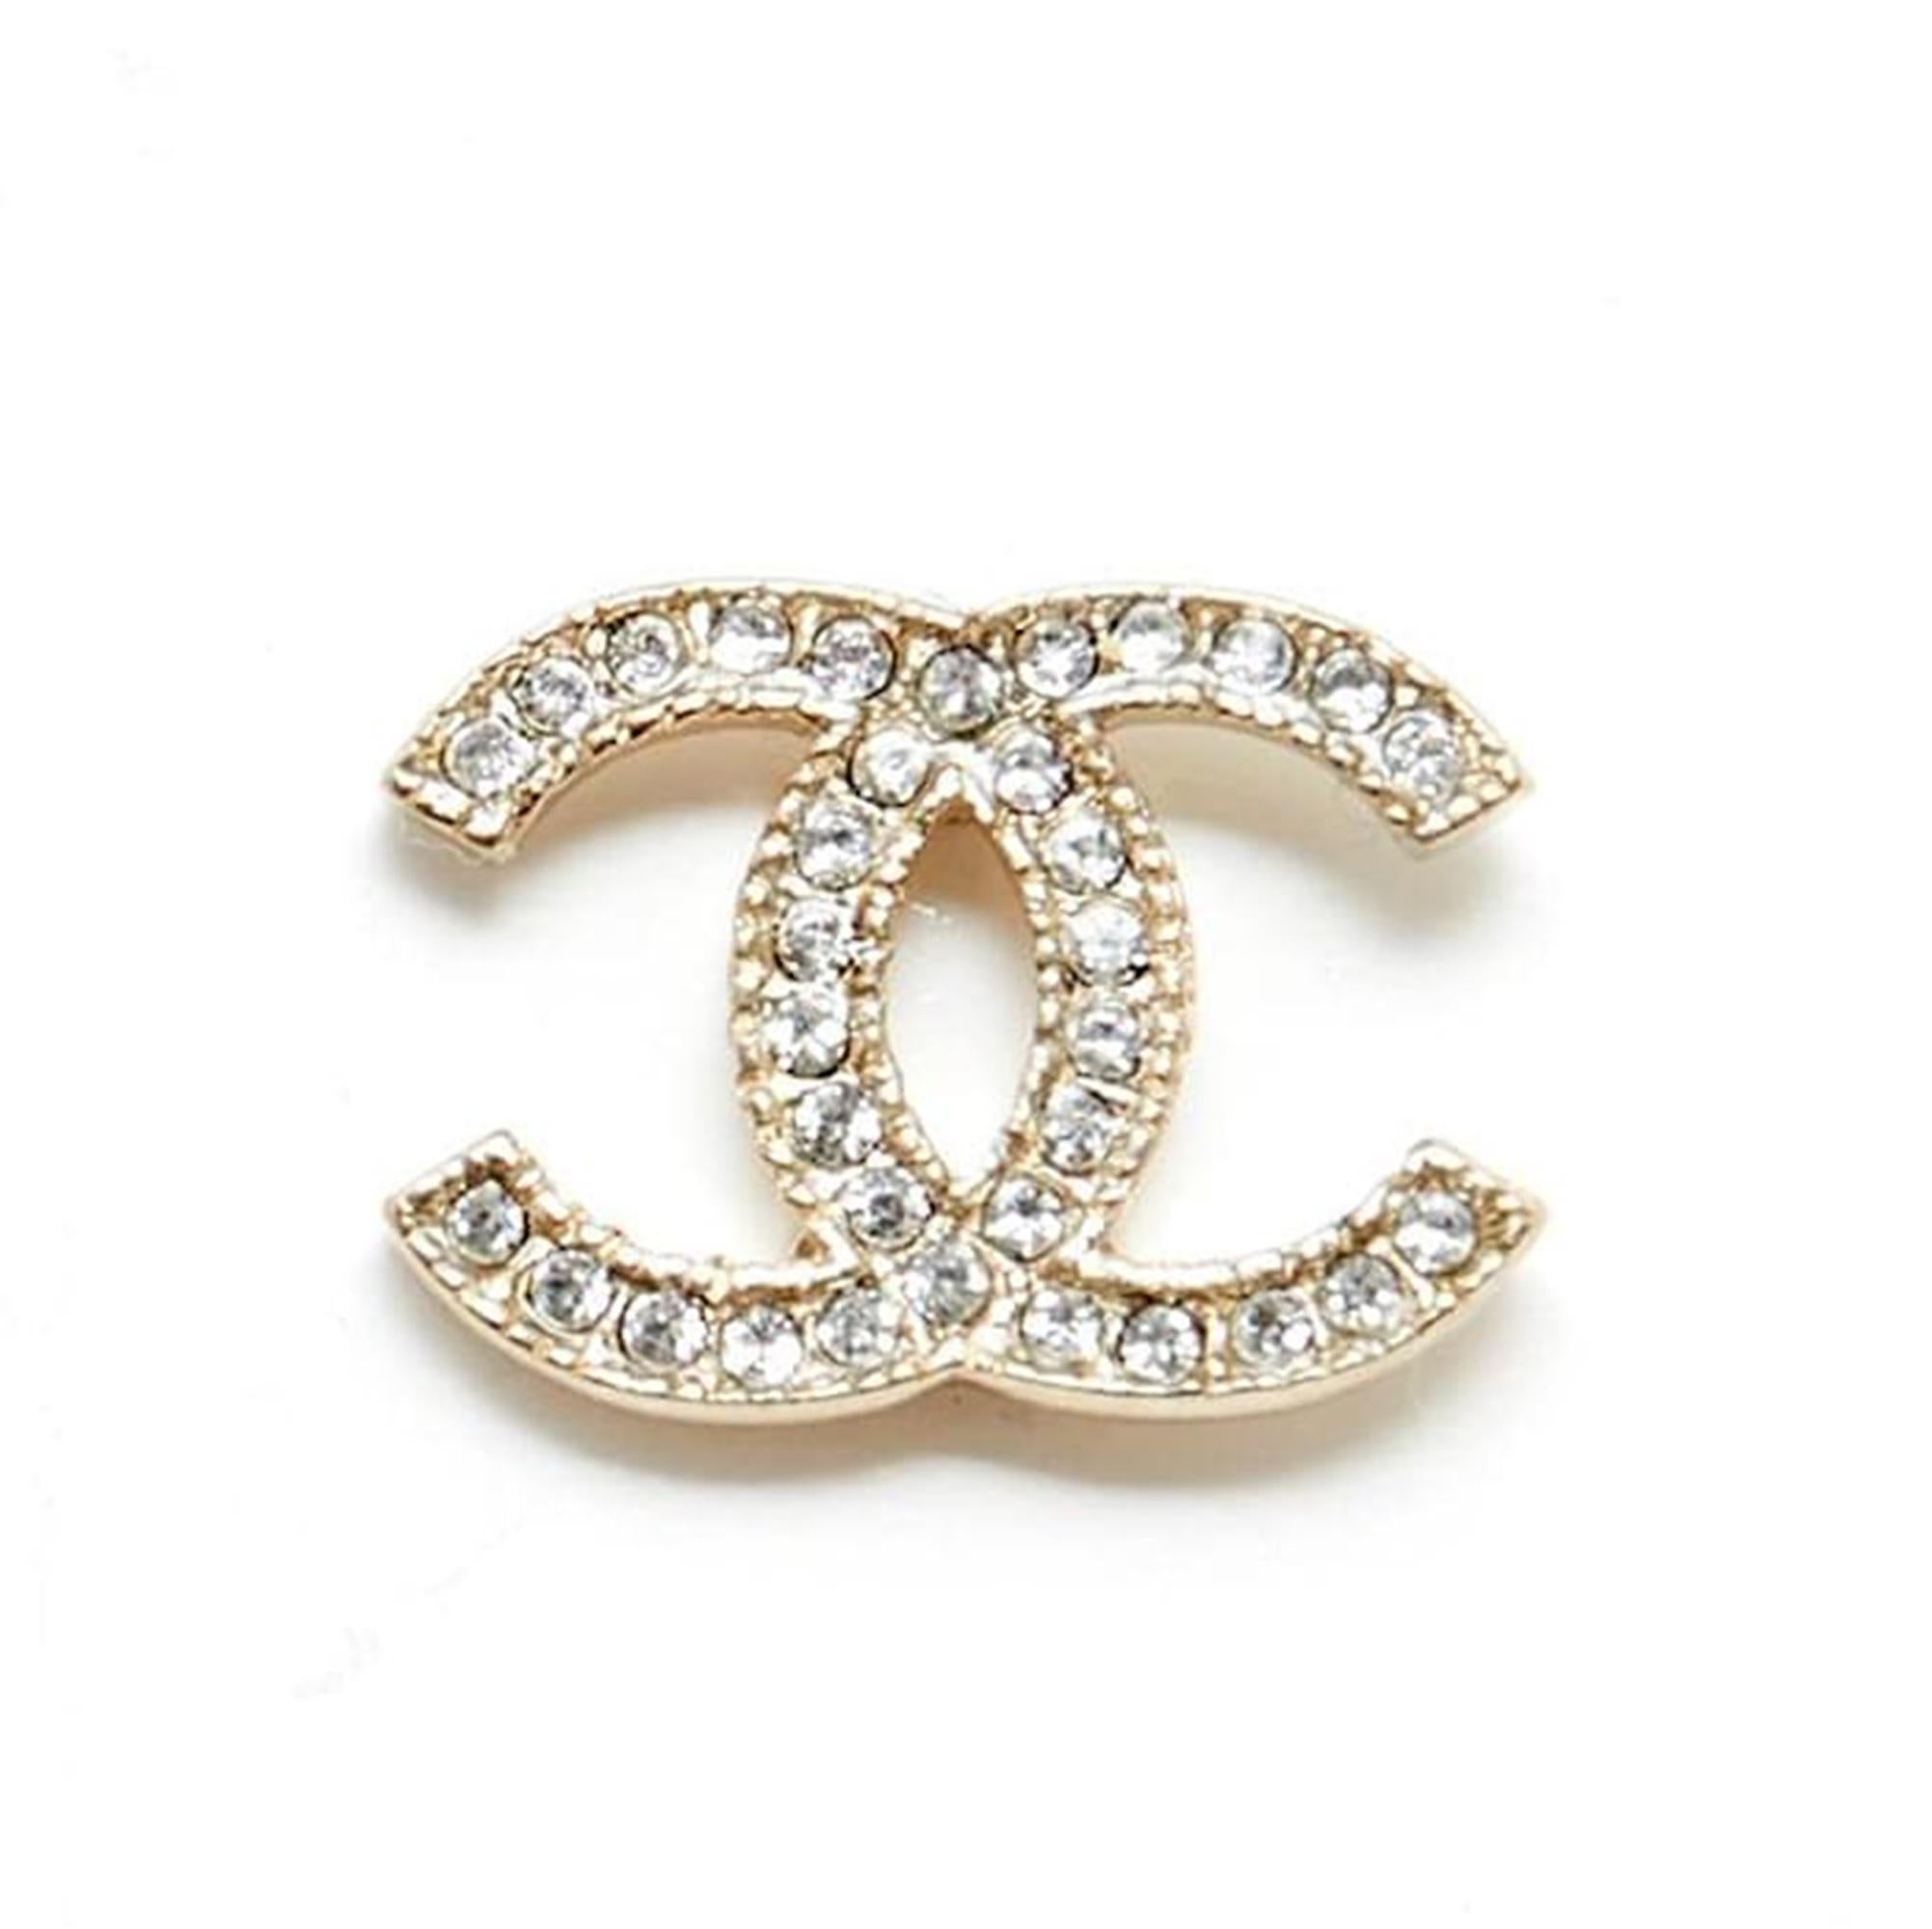 Chanel stud earrings in slightly gold metal (between gold and silver) with the CC symbol inlaid with small white rhinestones. Width 1.55 cm x height 1.15 cm. The curls are delivered without original packaging or invoice, they are in perfect